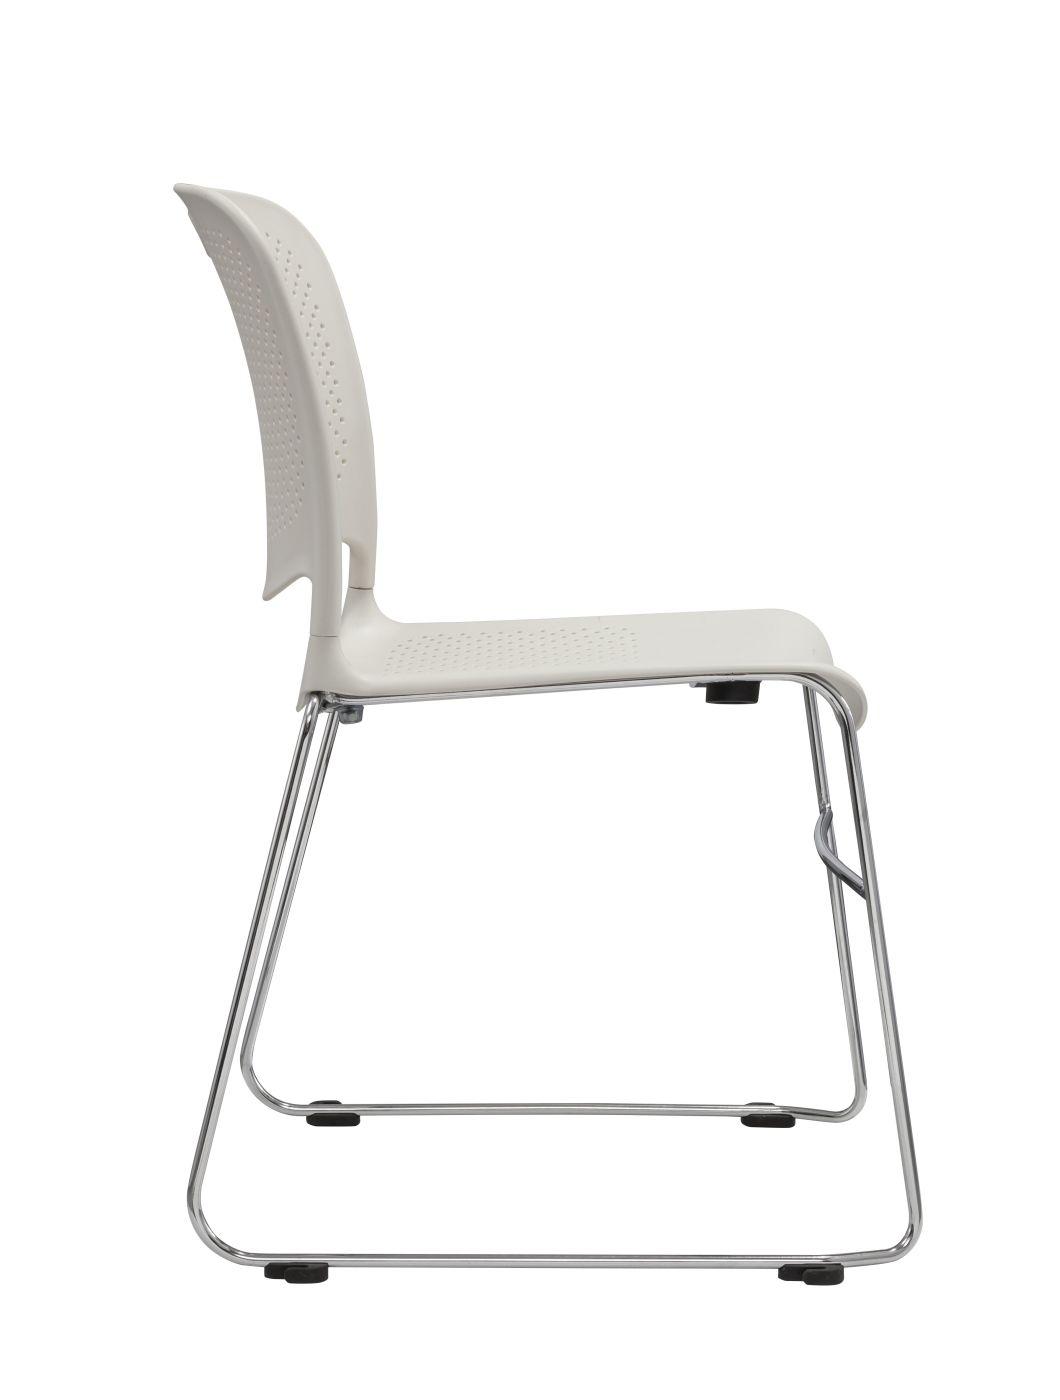 White Color Plastic Shell Seat Cushion Optional New Design Chromed Finished Frame Stool Chair